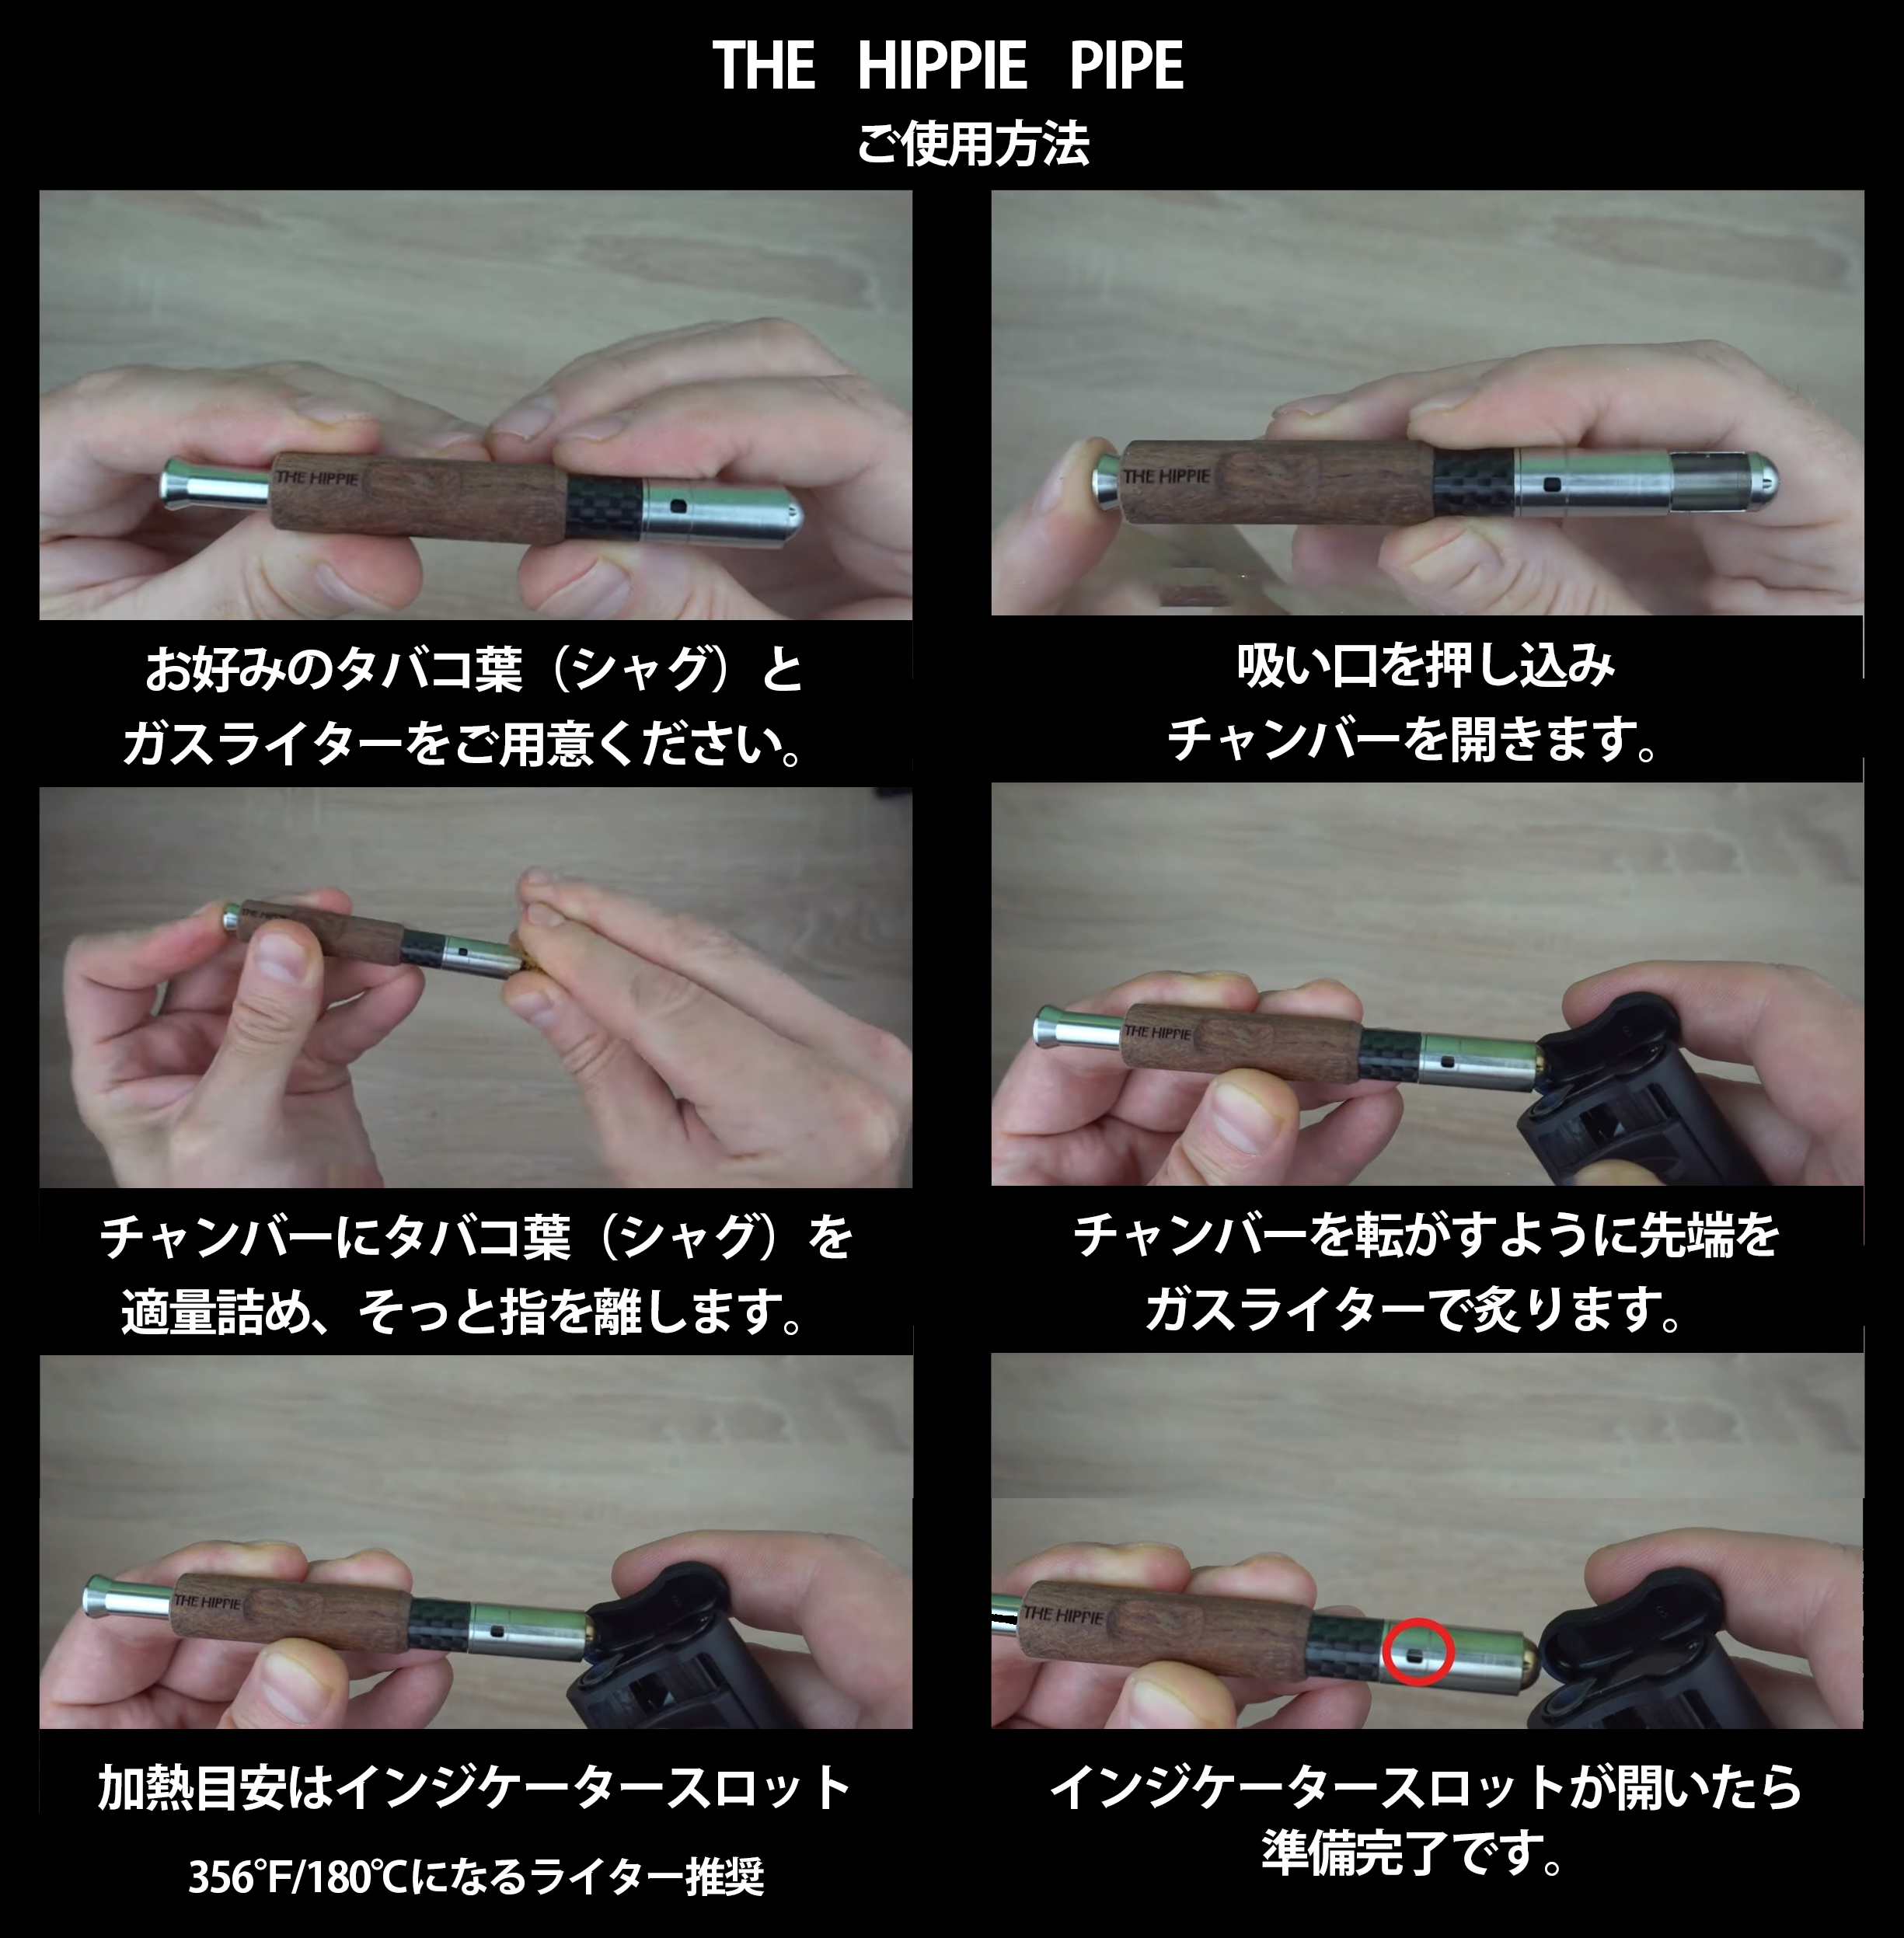 The Hippie Pipe レビュー｜デザイン性と利便性に優れたアナログ